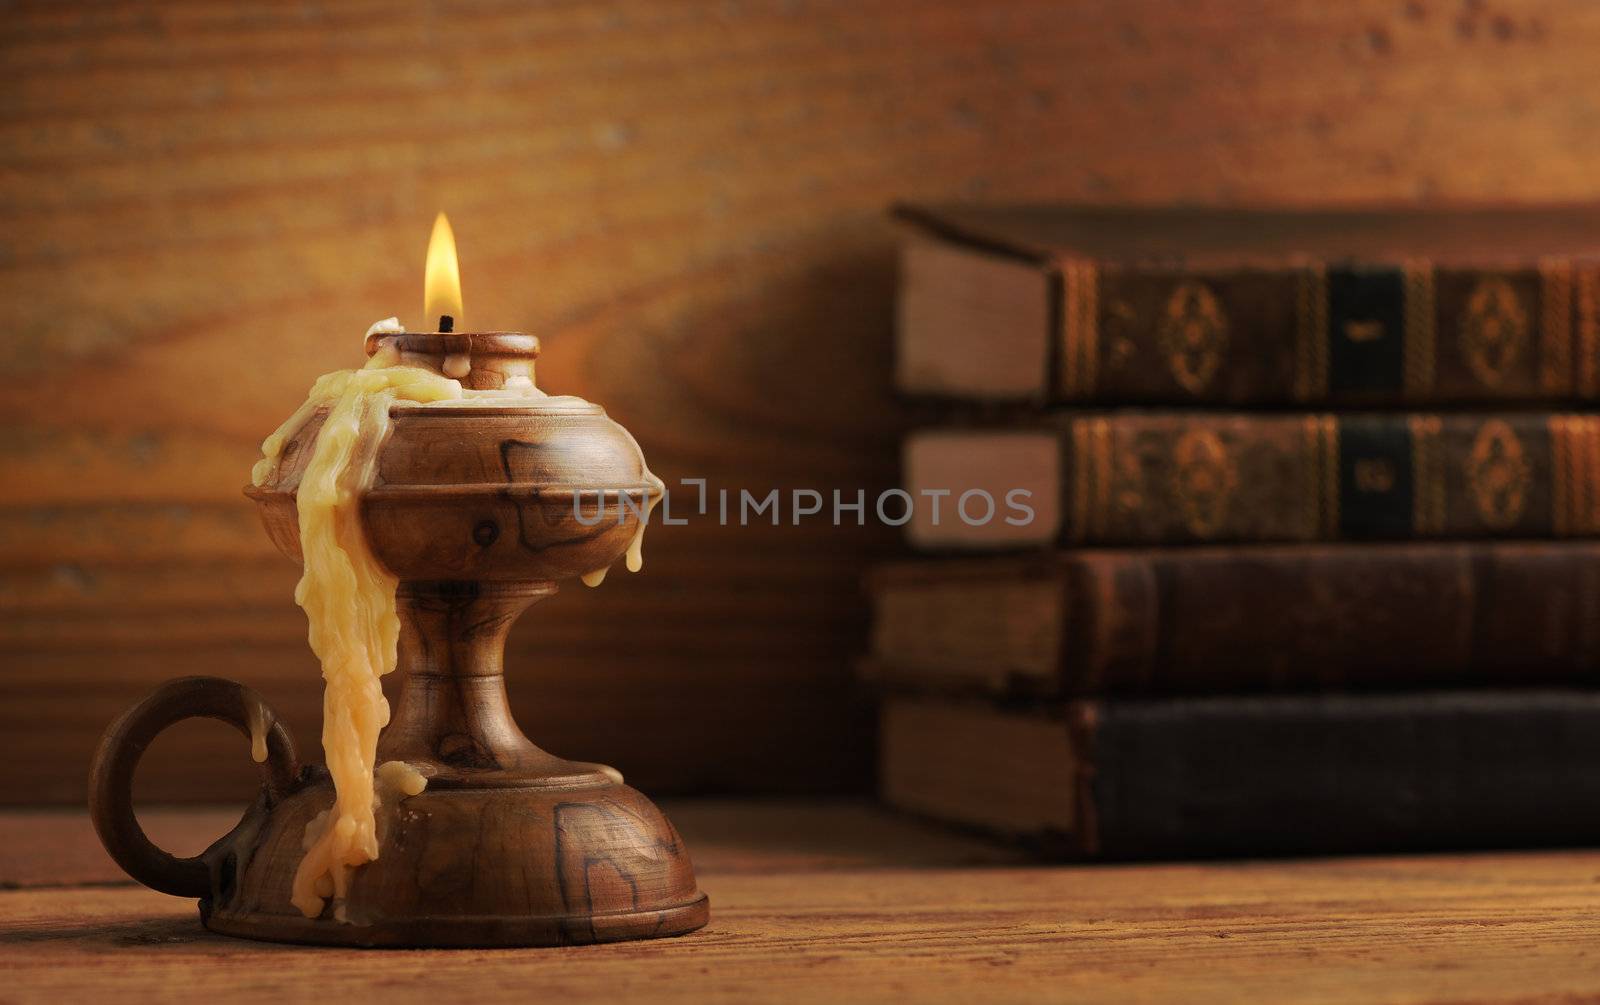 old candle on a wooden table, old books in the background by stokkete